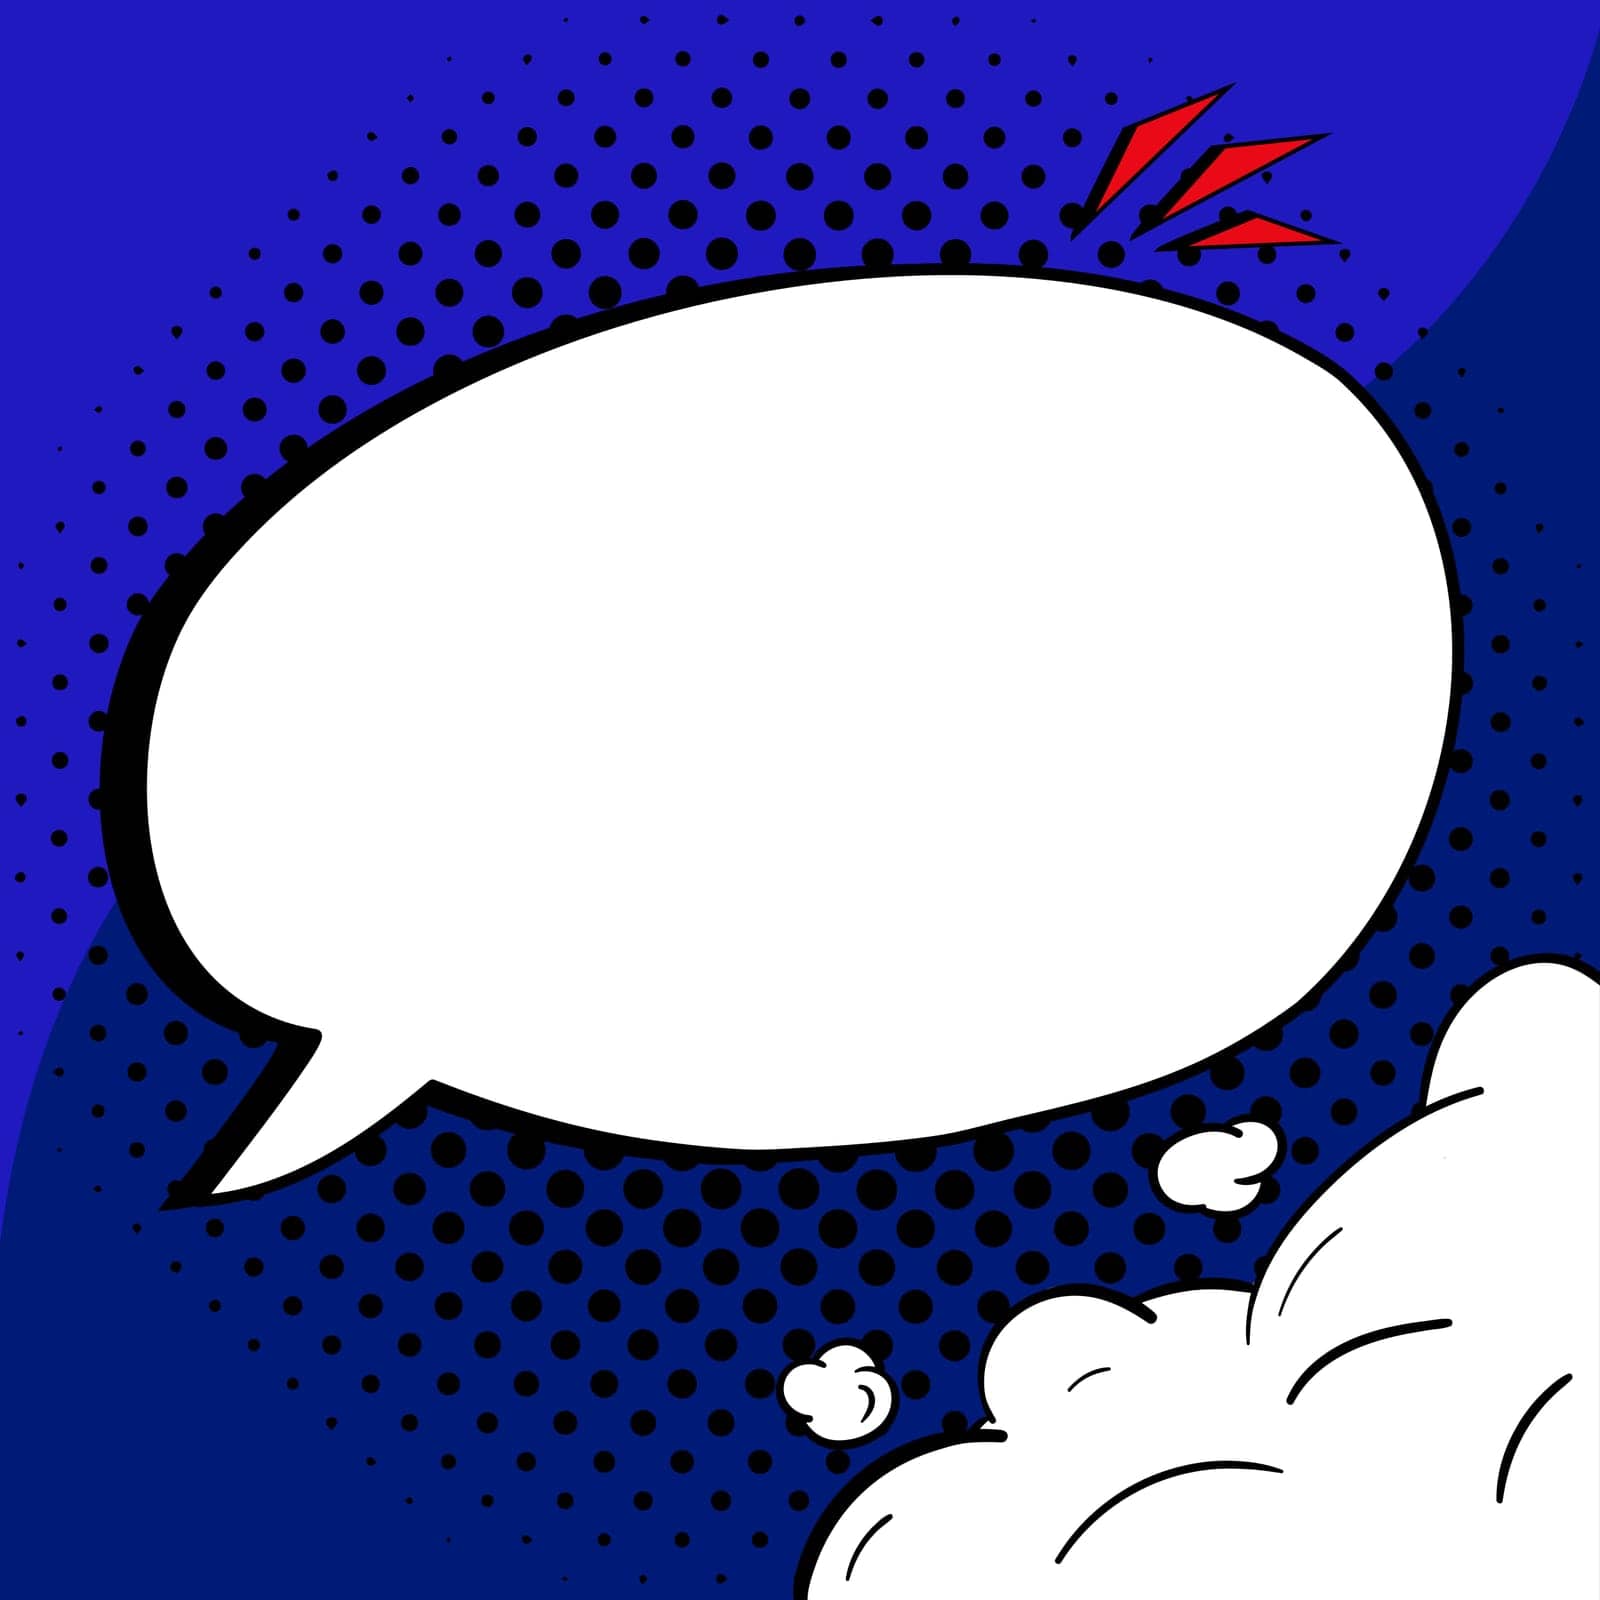 Comic Blank Speech Bubble With Copy Space And Colorful Doodles. Design Of Empty Template In Explosion Framework Representing Social Media Messaging And Connecting. by nialowwa